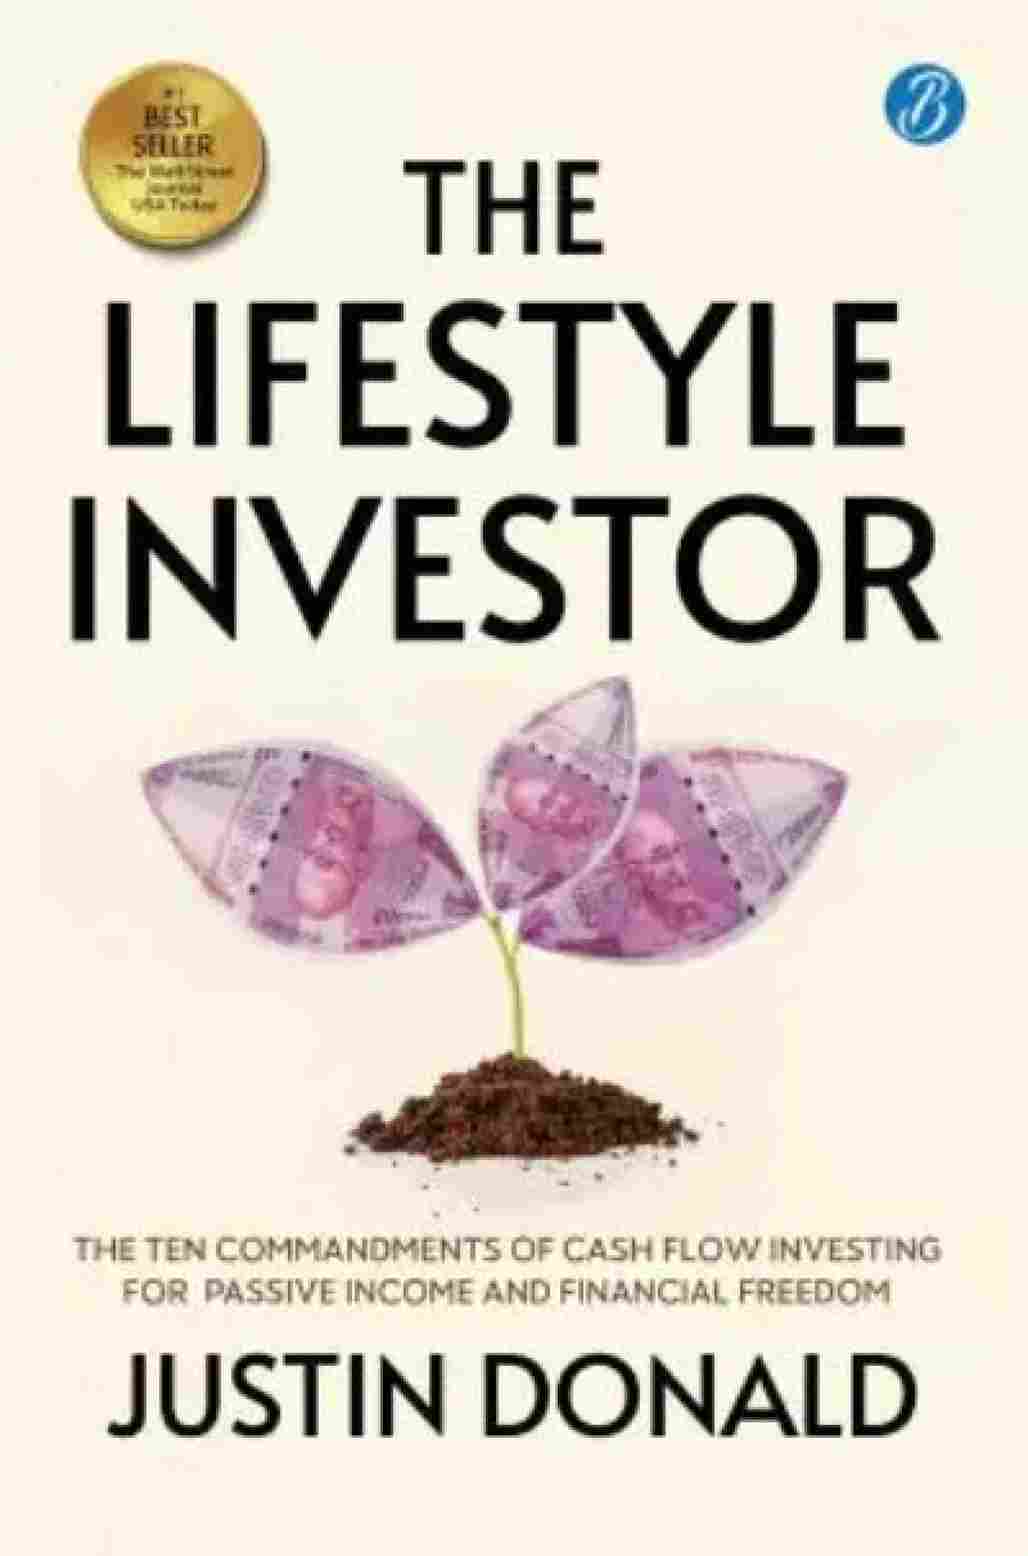 The Lifestyle Investor (Paperback) - Justin Donald